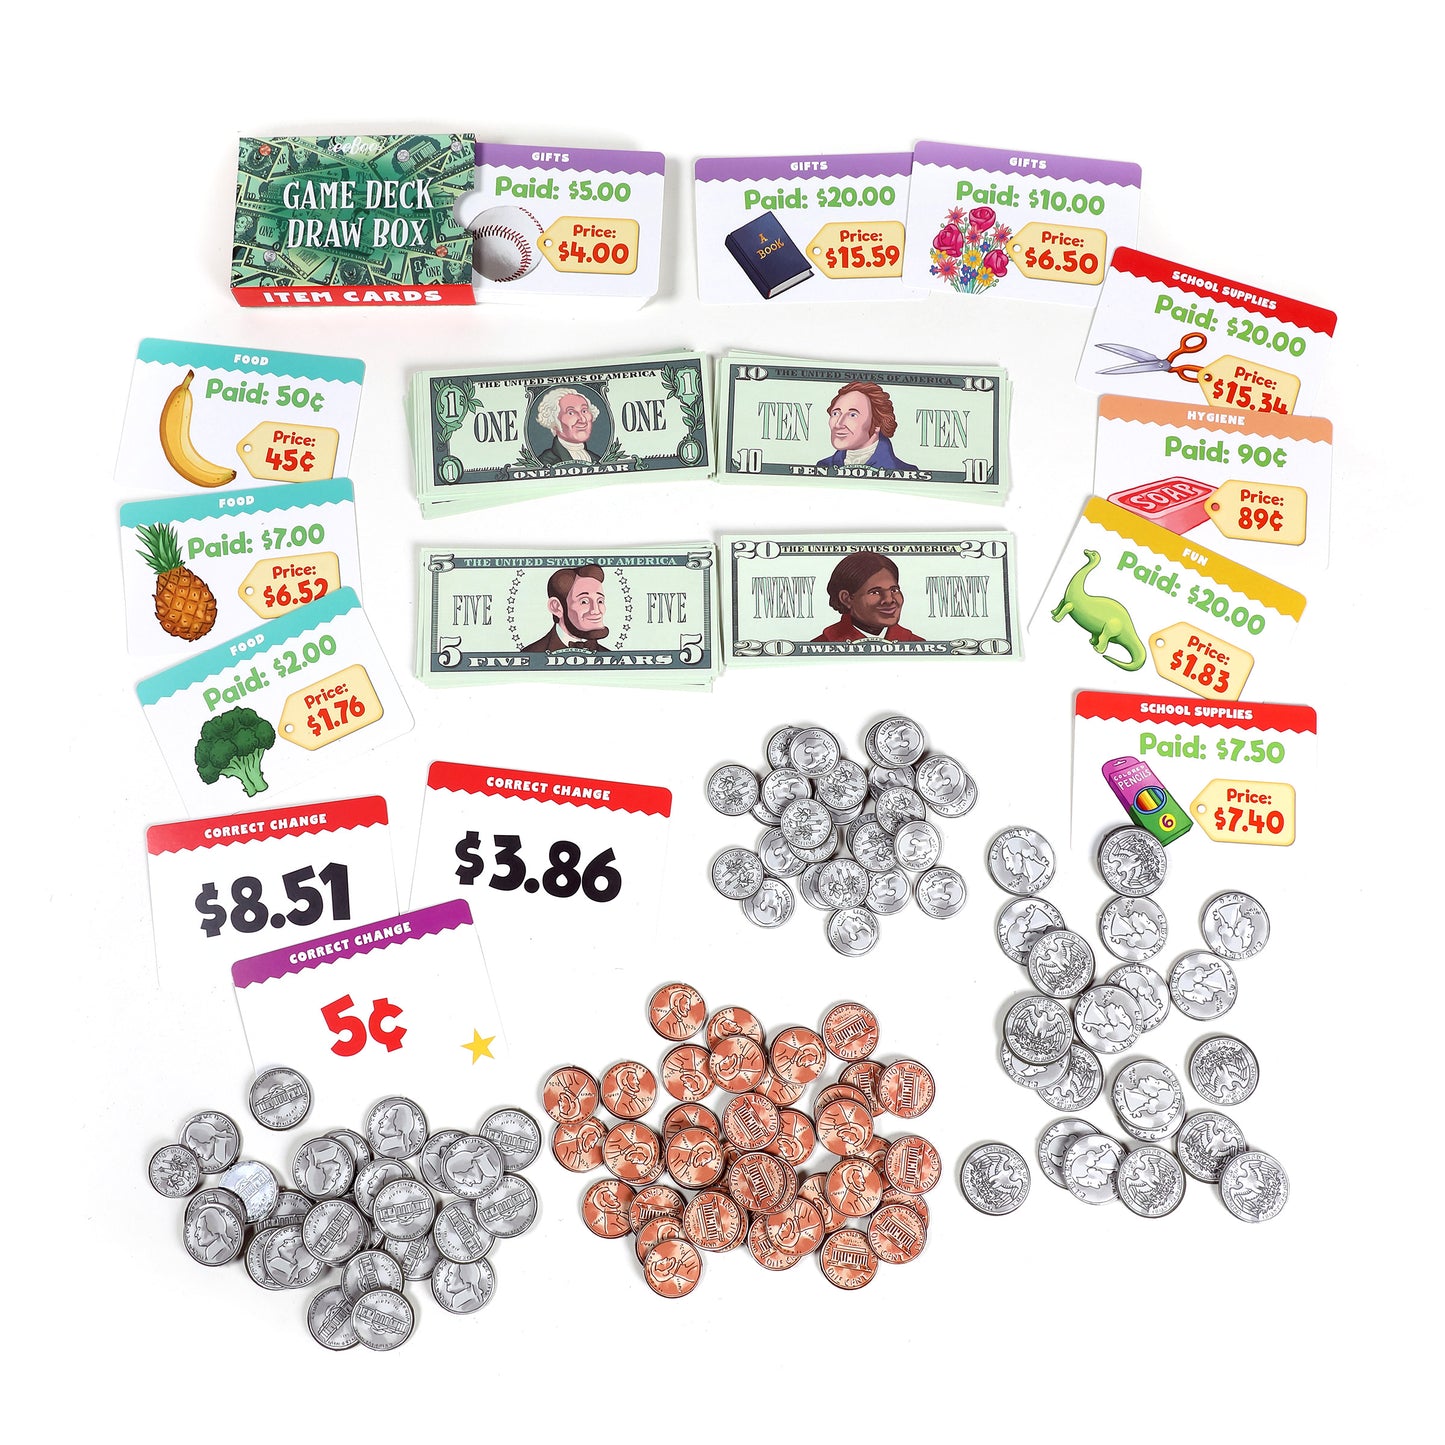 Making Change An Award Winning Game of Money & Speed Subtraction eeBoo for Ages 5+